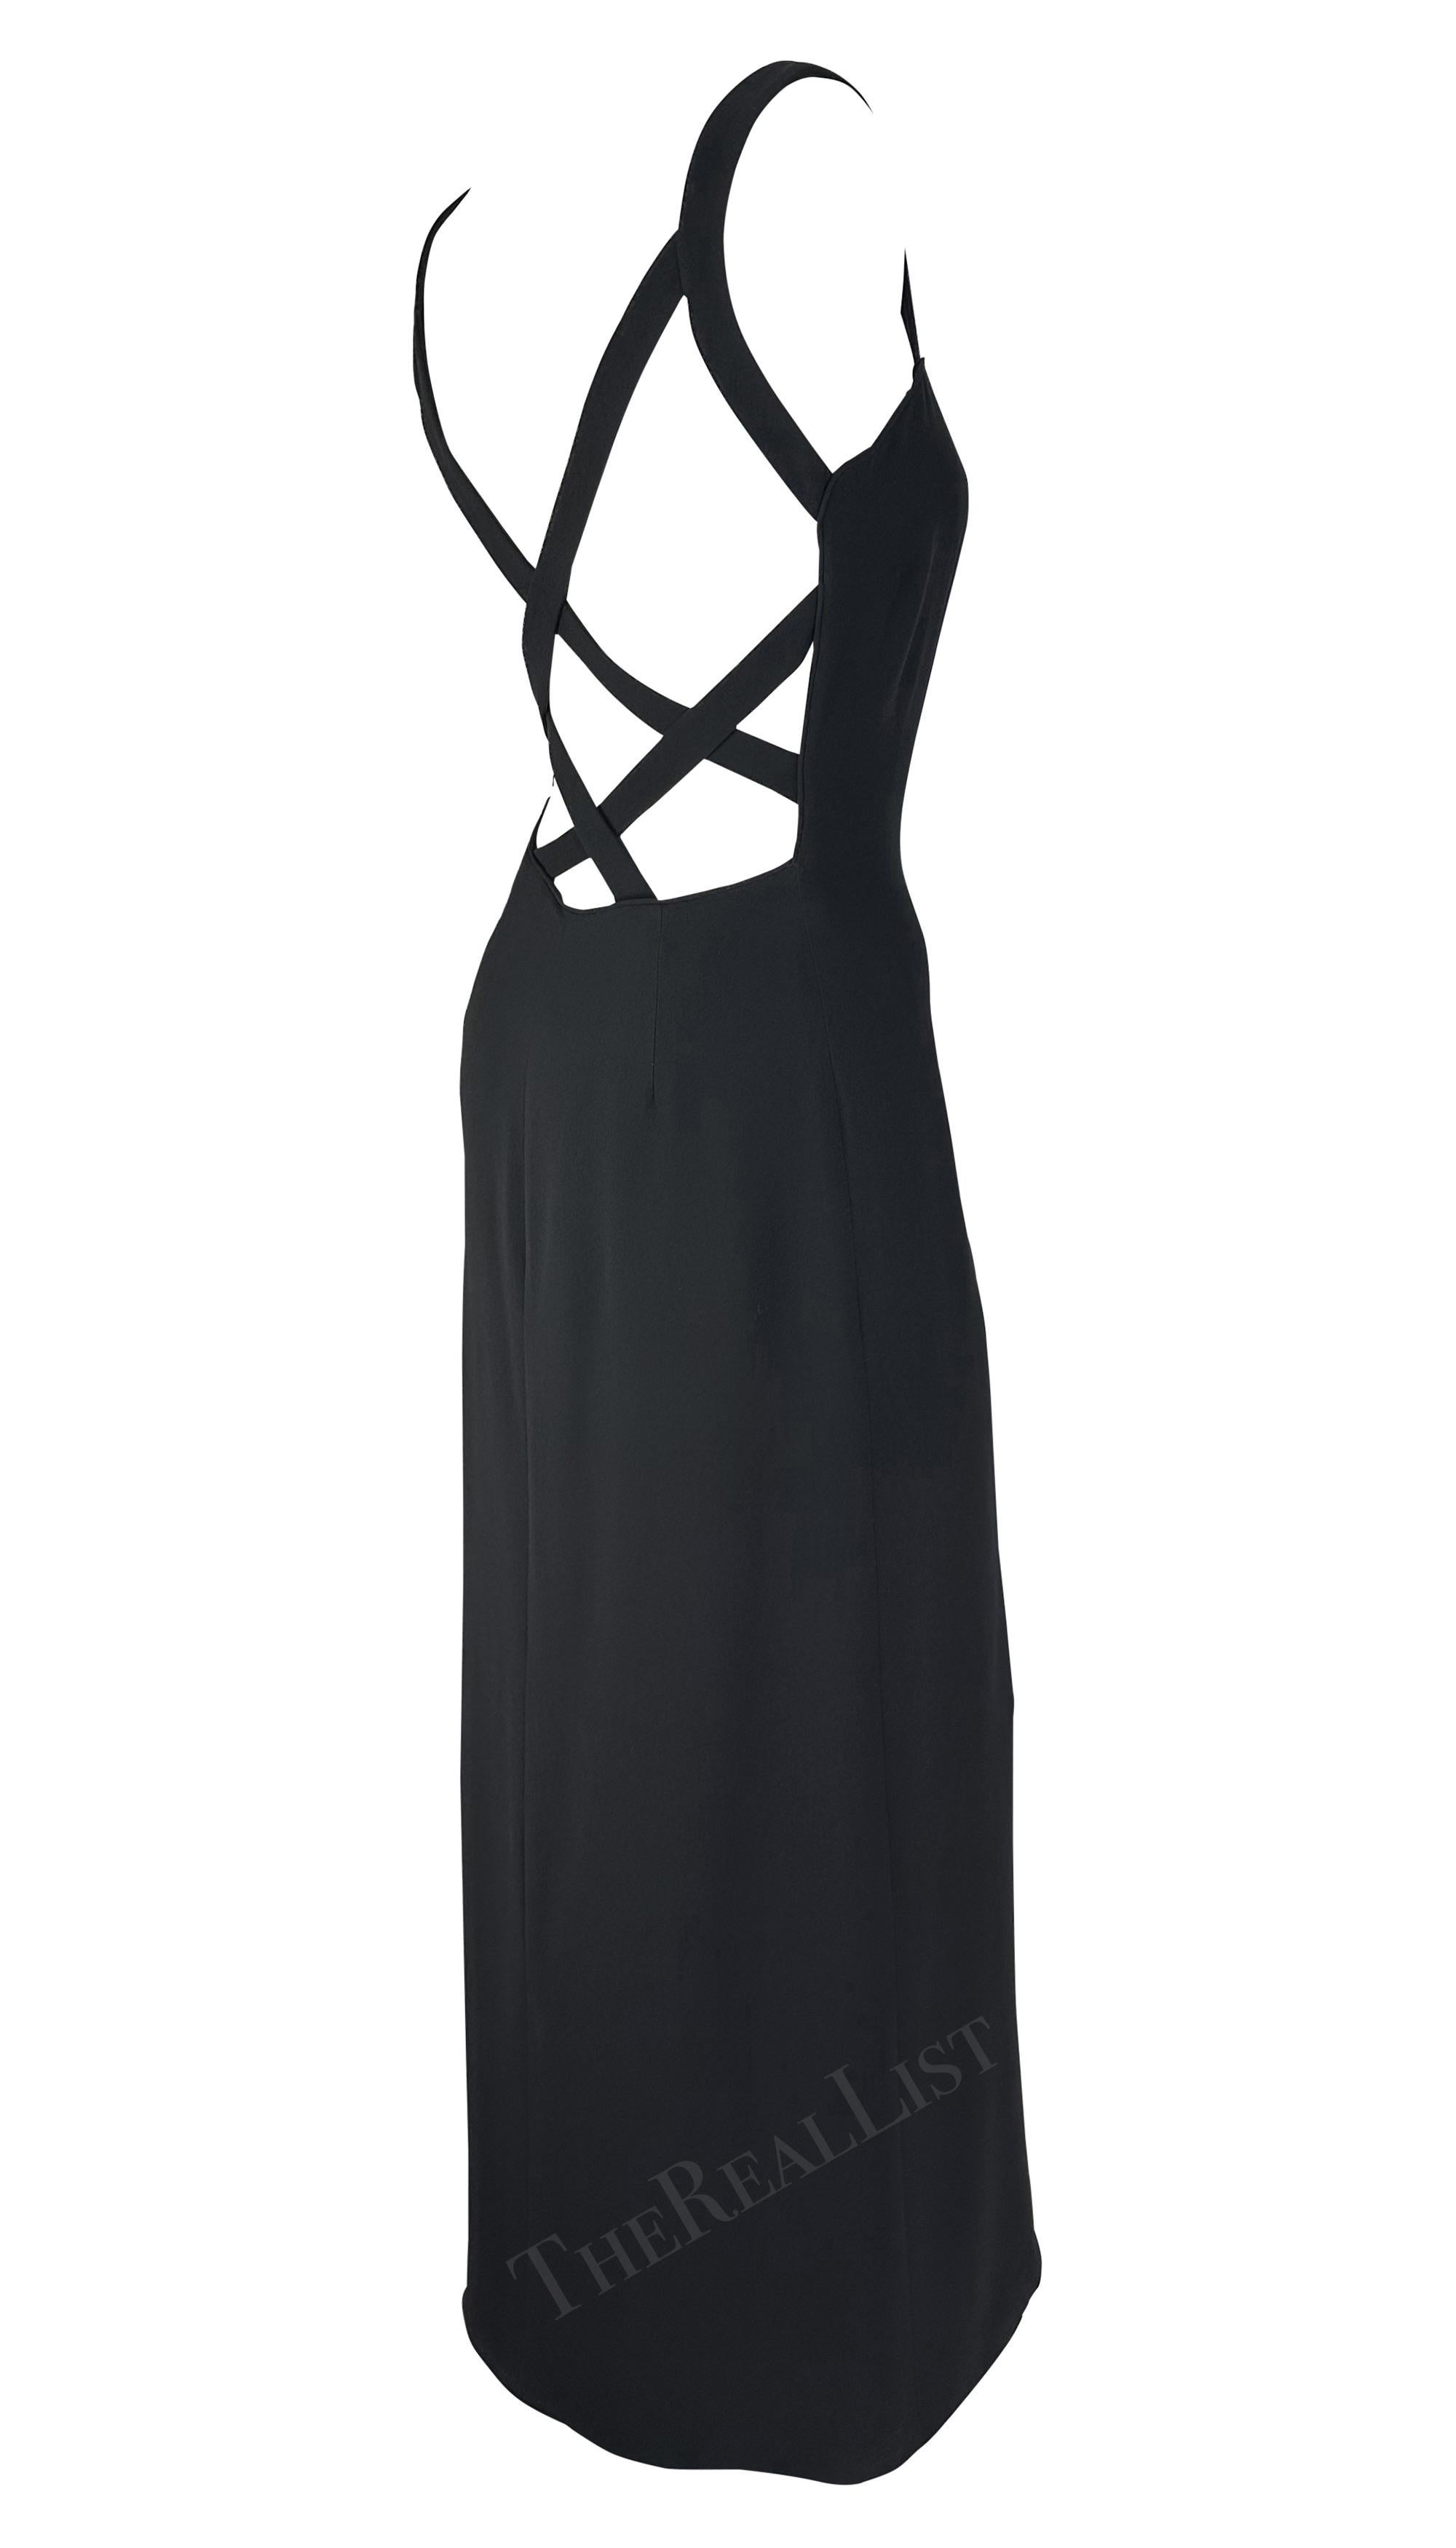 Presenting a fabulous black Giorgio Armani gown. From the late 1990s, this classic black slip gown is amped up with straps that delicatley cover an exposed back. Effortlessly chic and timeless, this vintage Giorgio Armani gown boats the perfect mix